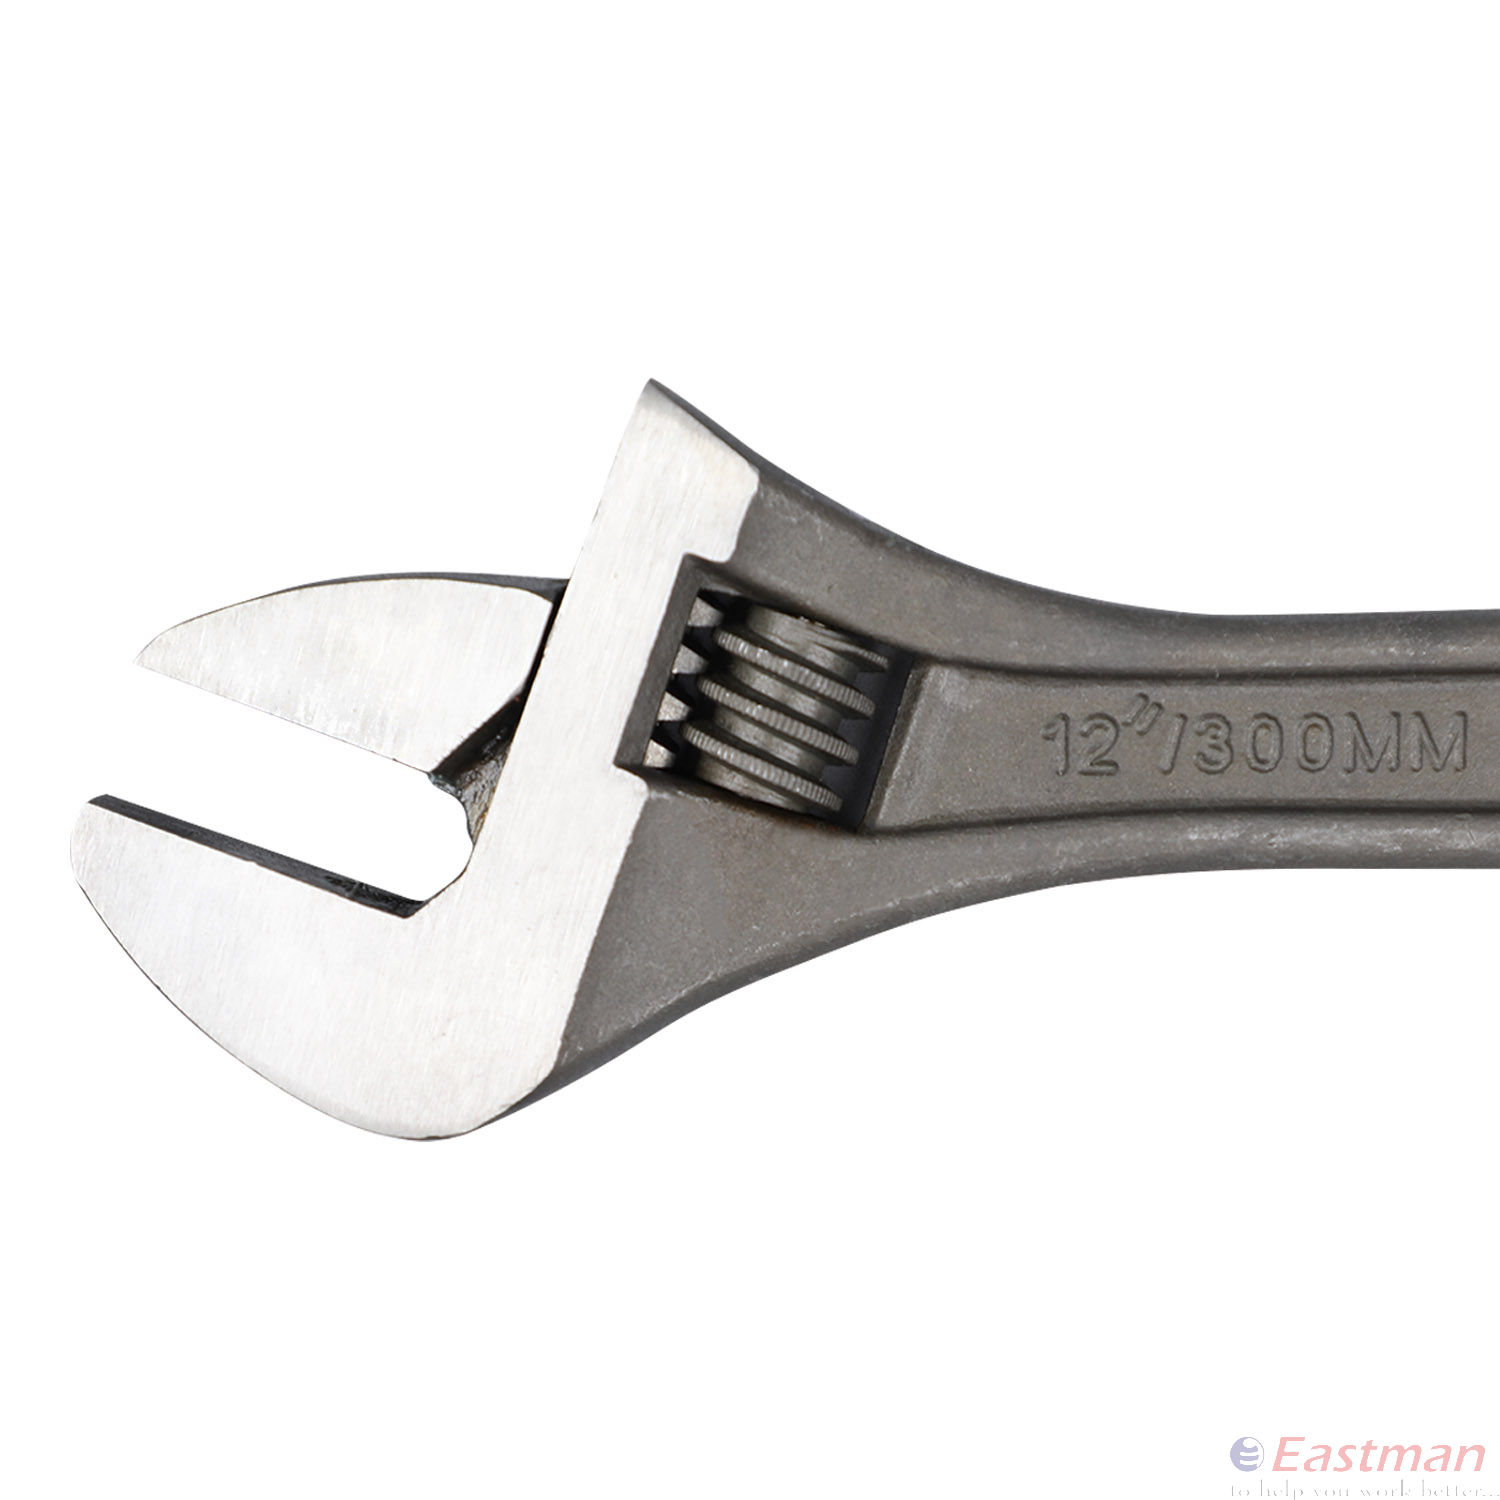 E-2051P Adjustable Wrench